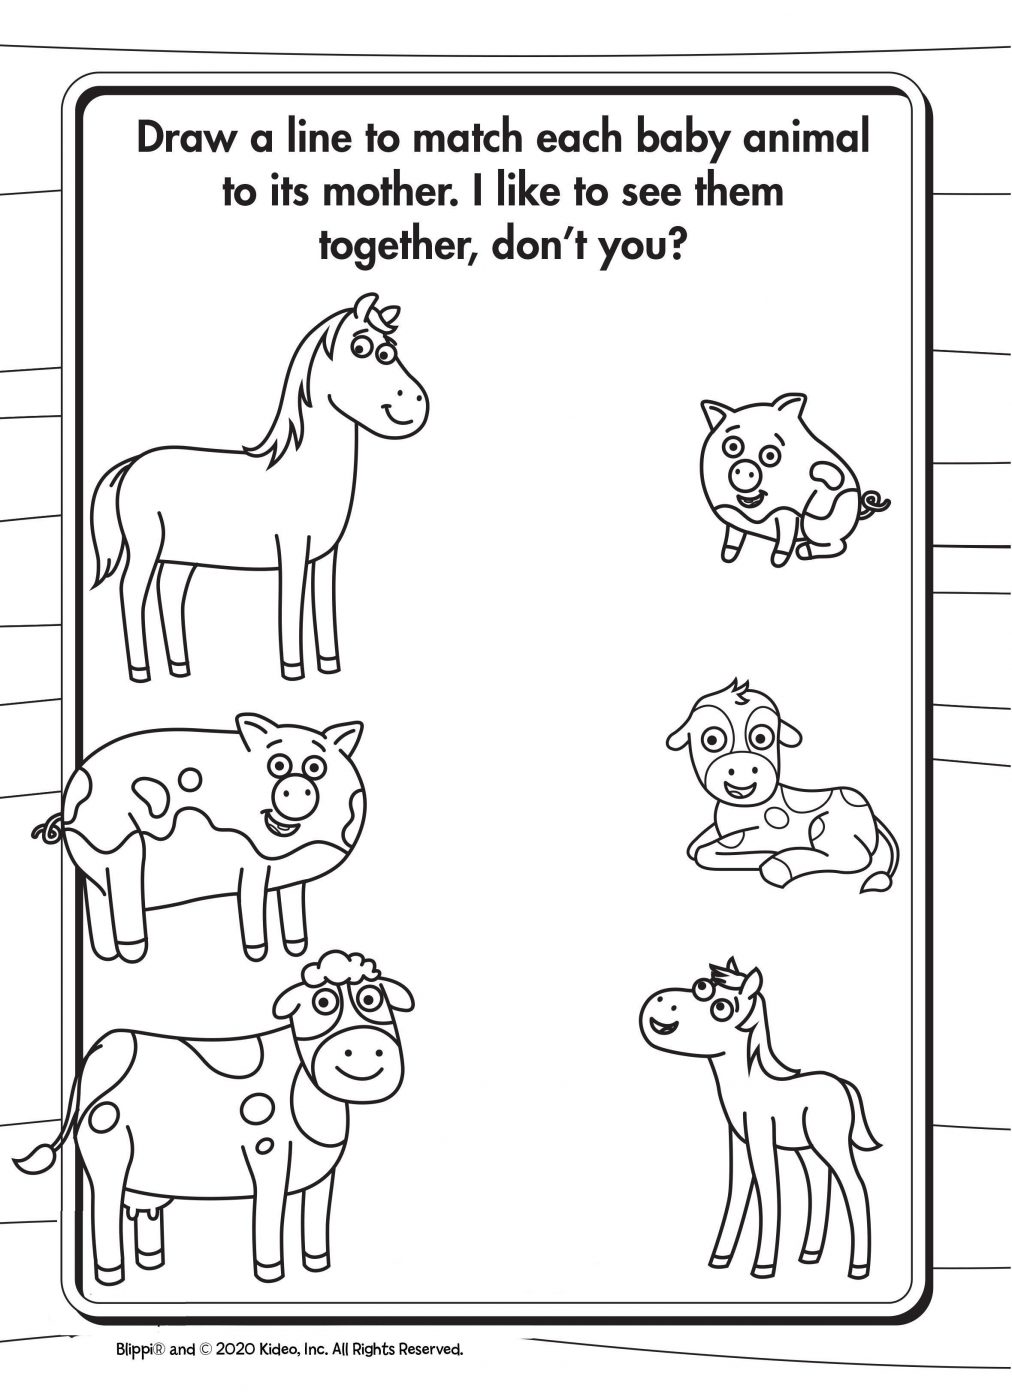 Draw a line from each baby animal to its mother.